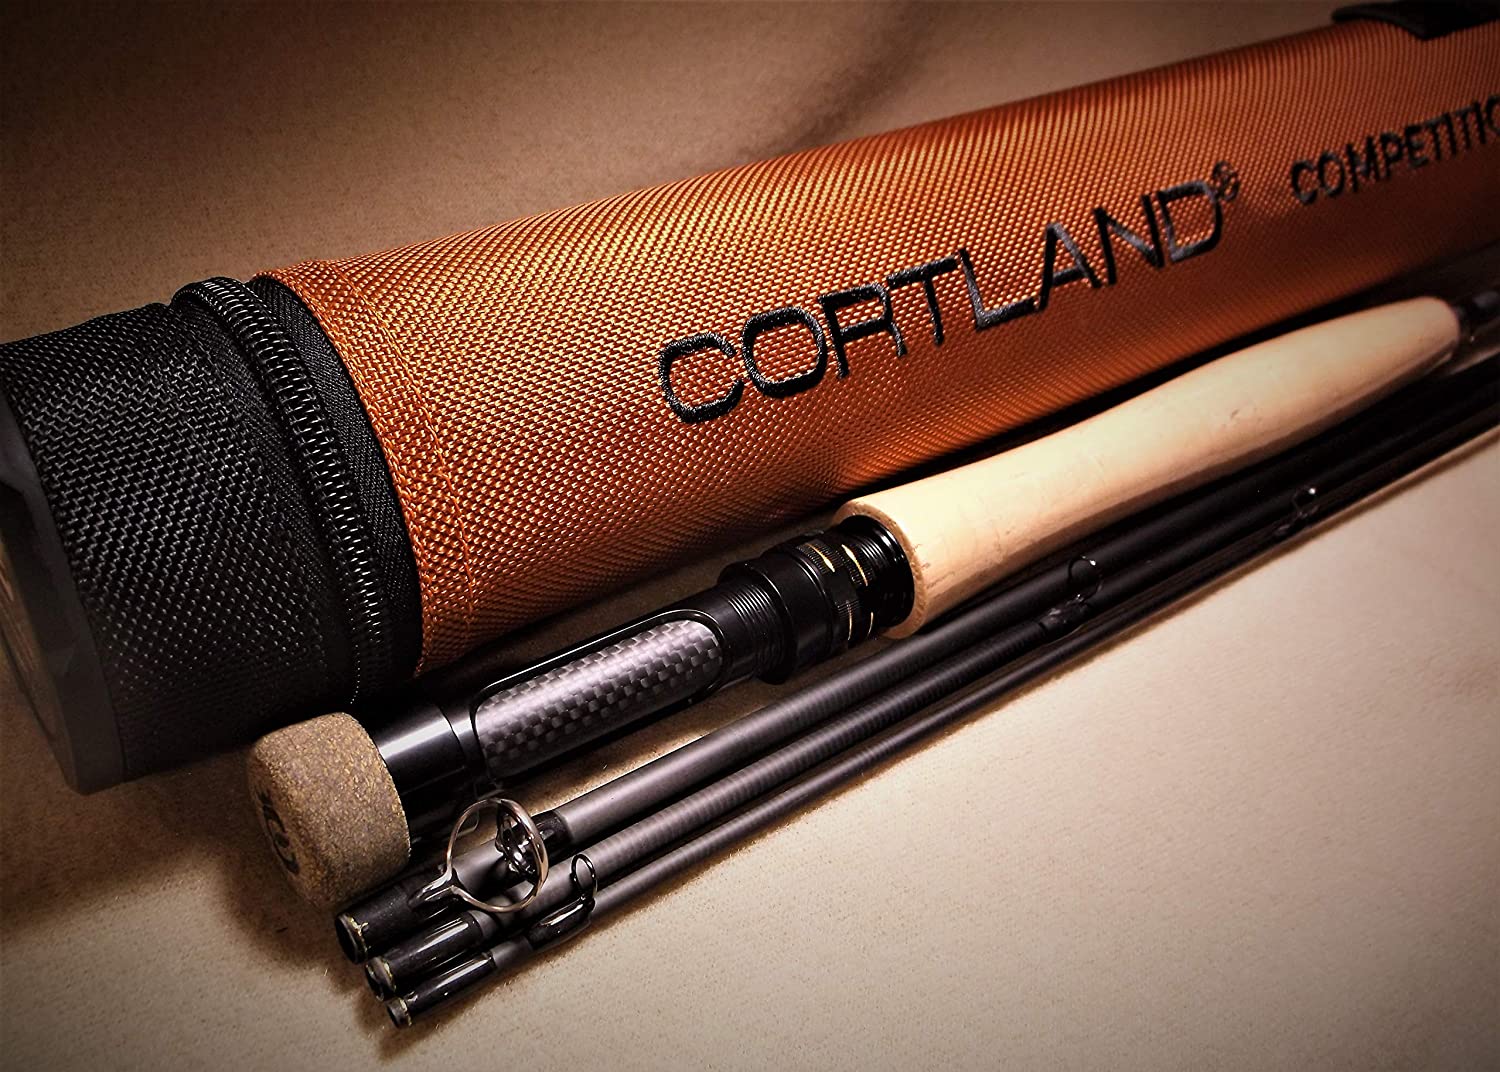 Cortland Competition Nymph MK2 10' #2 